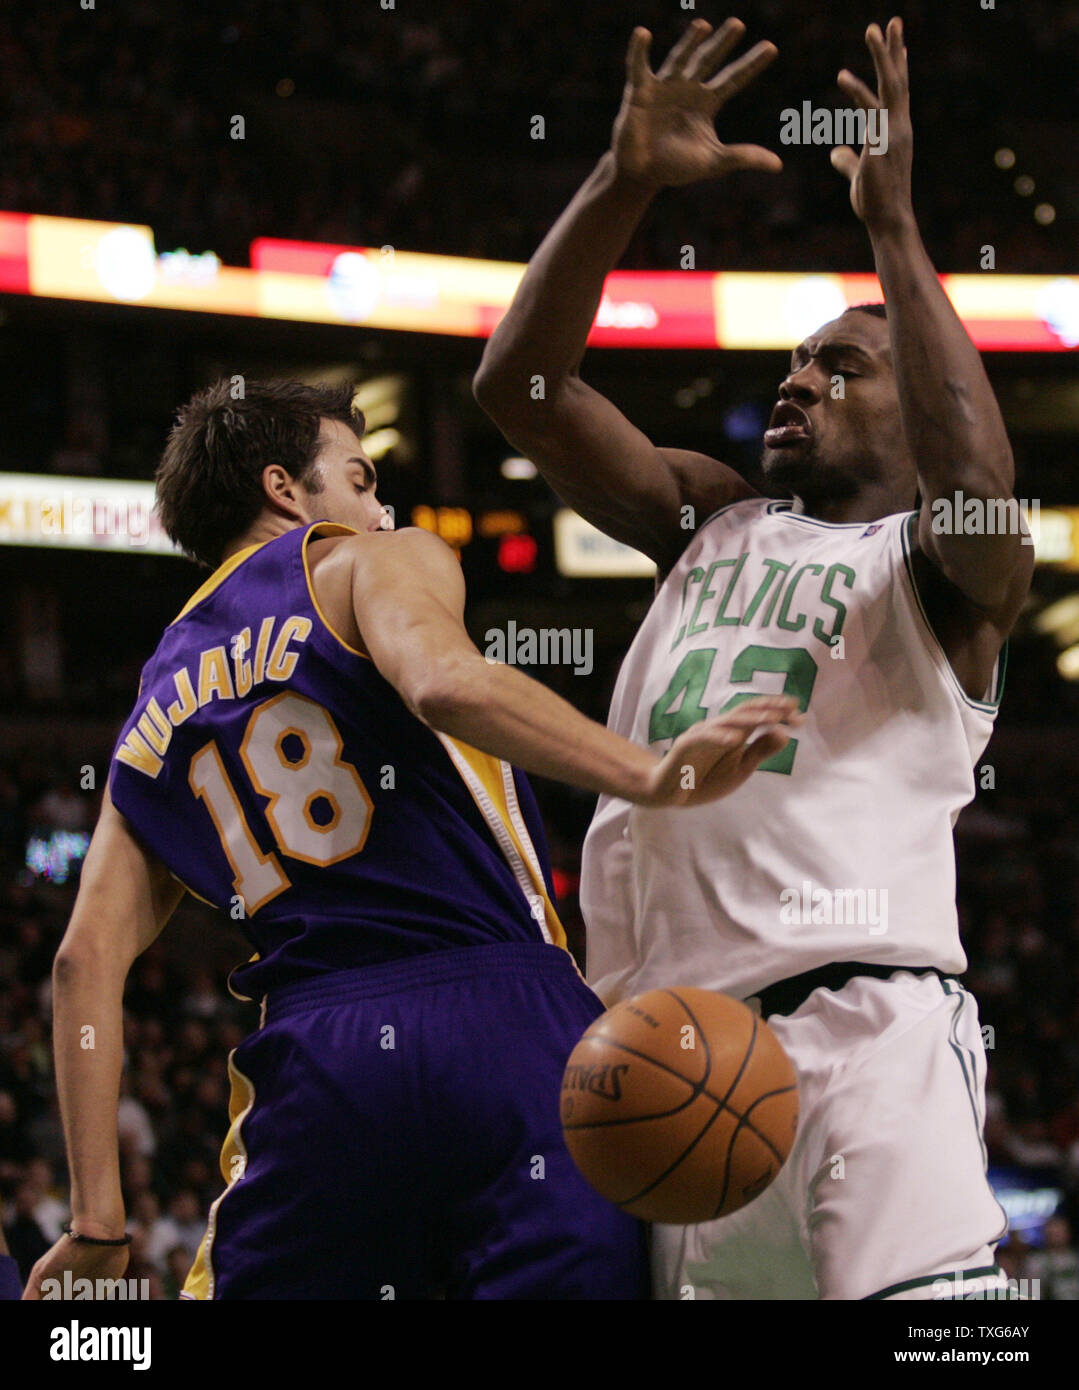 Los Angeles Lakers guard Sasha Vujacic (18) swants the ball away from Boston Celtics guard Tony Allen (42) in the first half at the TD Garden in Boston, Massachusetts on January 31, 2010.  The Lakers defeated the Celtics 90-89.   UPI/Matthew Healey Stock Photo